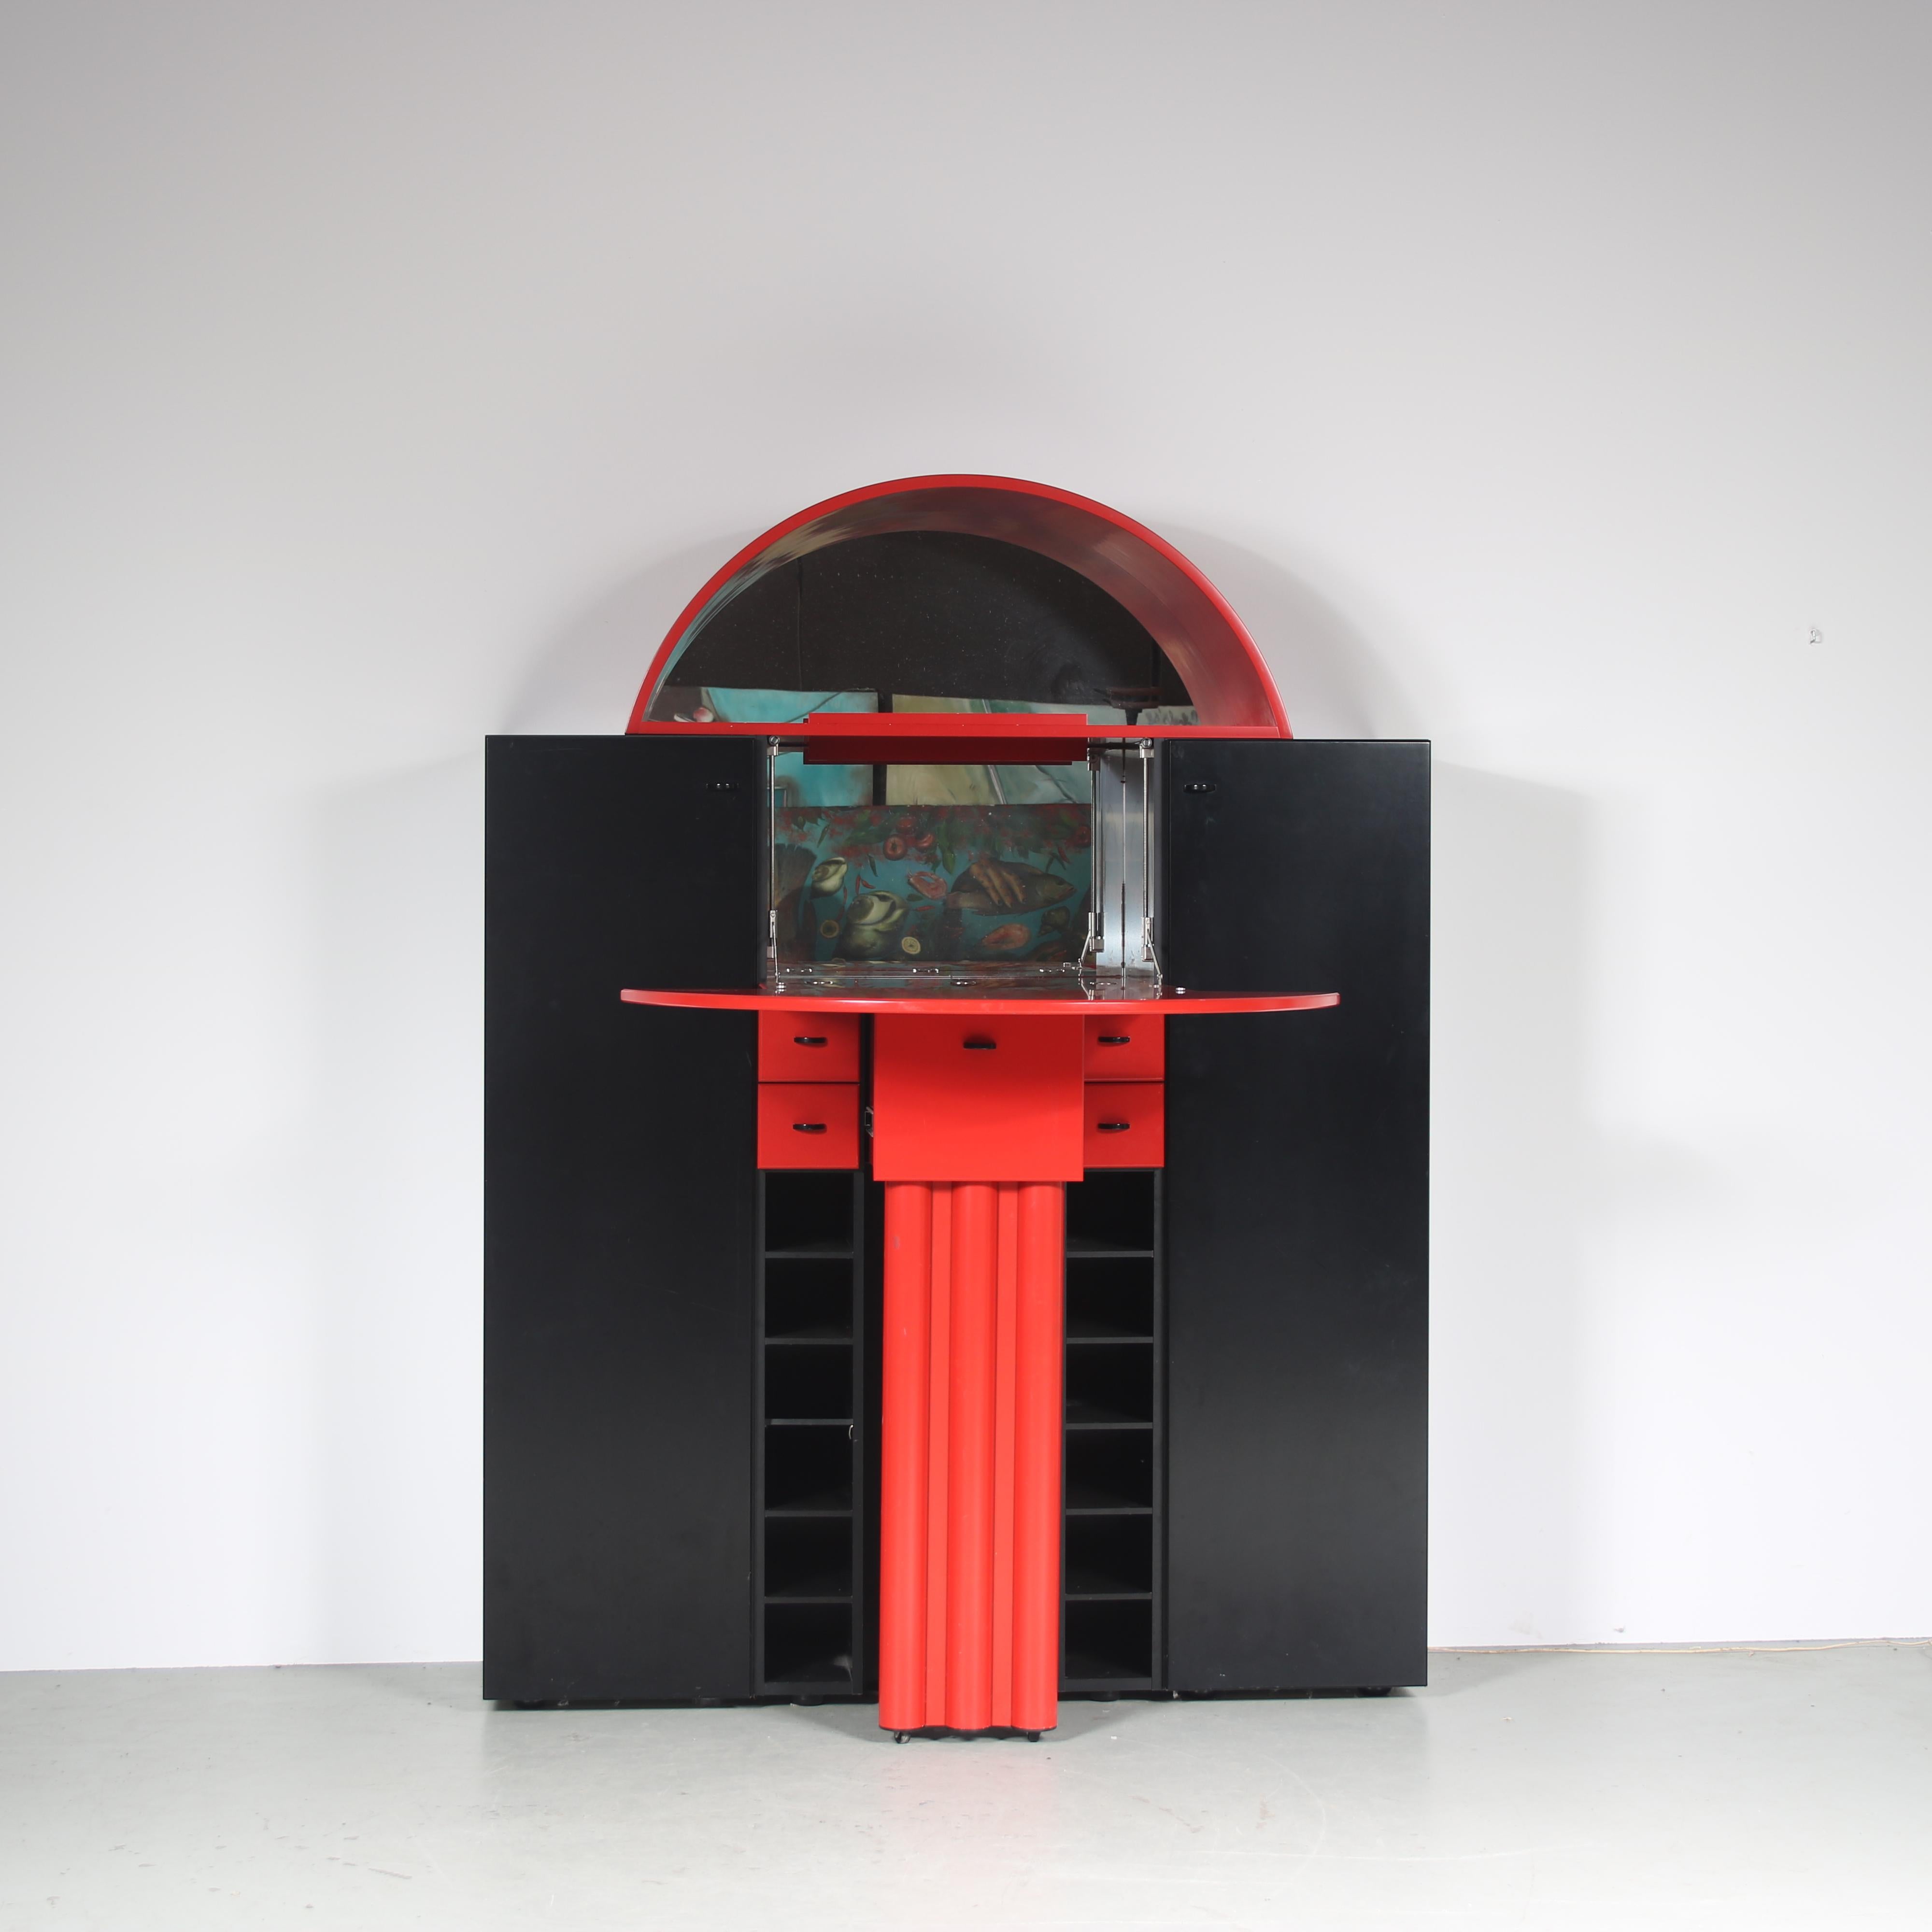 Wood Peter Maly “Duo” Cabinet for Interlübke, Germany 1980